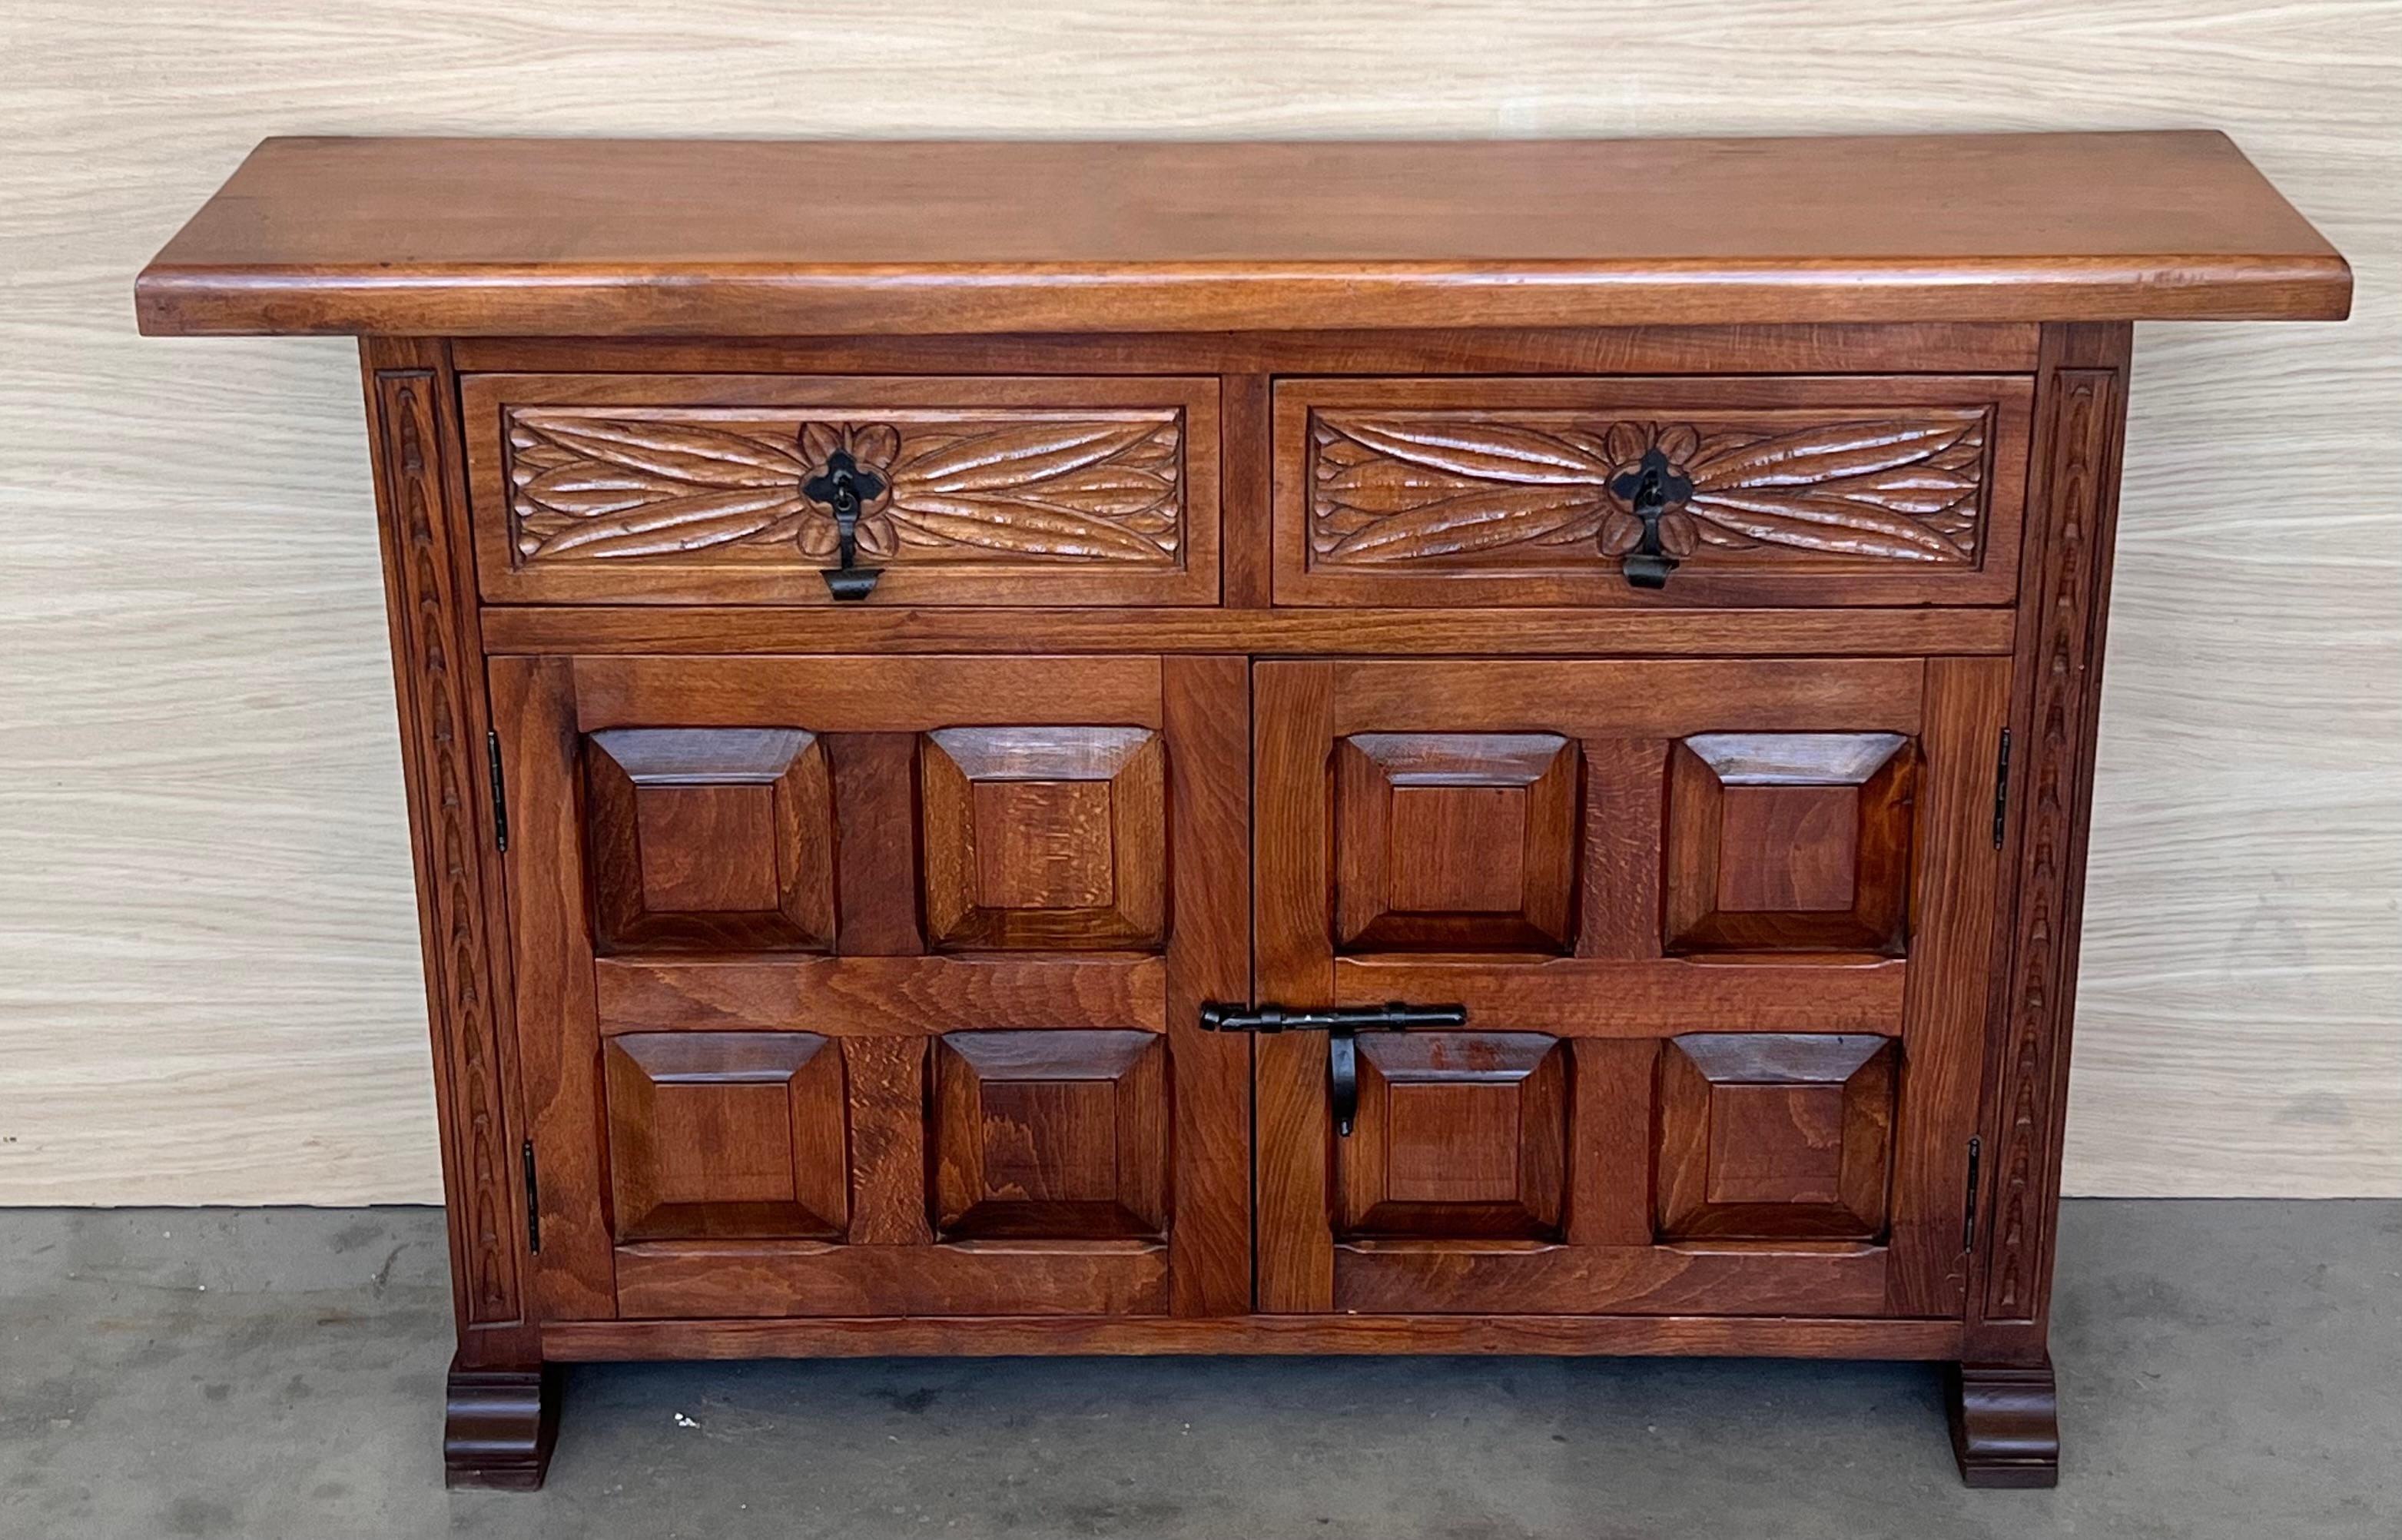 From Northern Spain, constructed of solid walnut, the rectangular top with molded edge atop a conforming case housing two drawers over two doors, the doors paneled with solid walnut, raised on a plinth base.
Beautiful carved drawers and original